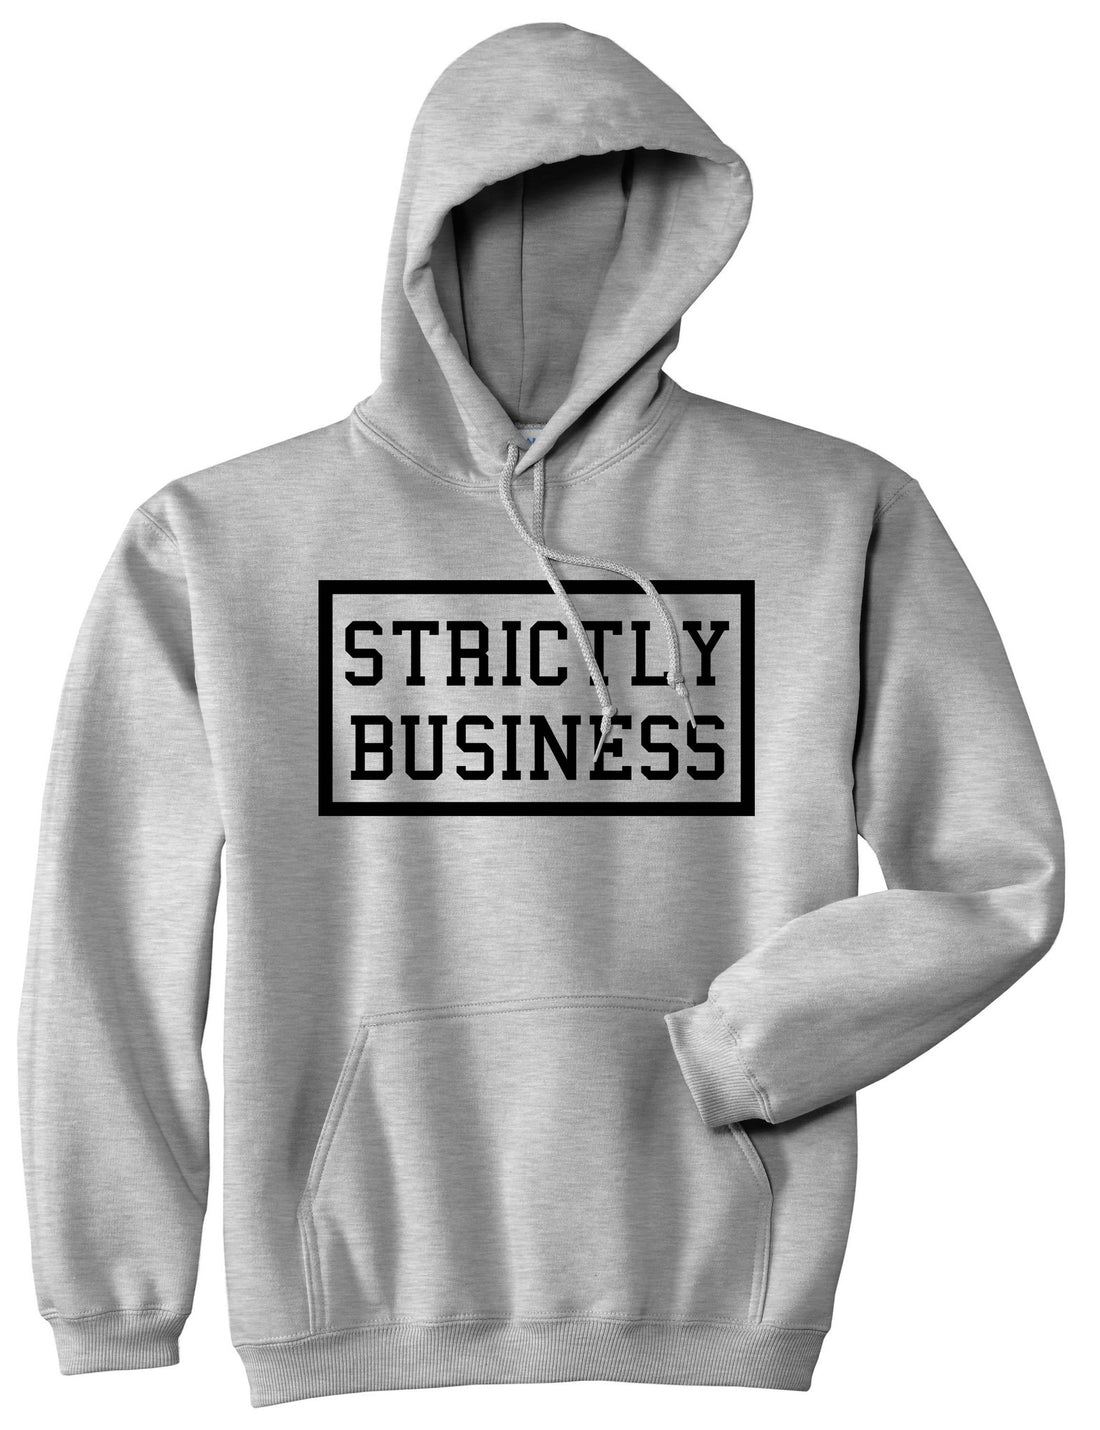 Strictly Business Pullover Hoodie Hoody in Grey by Kings Of NY